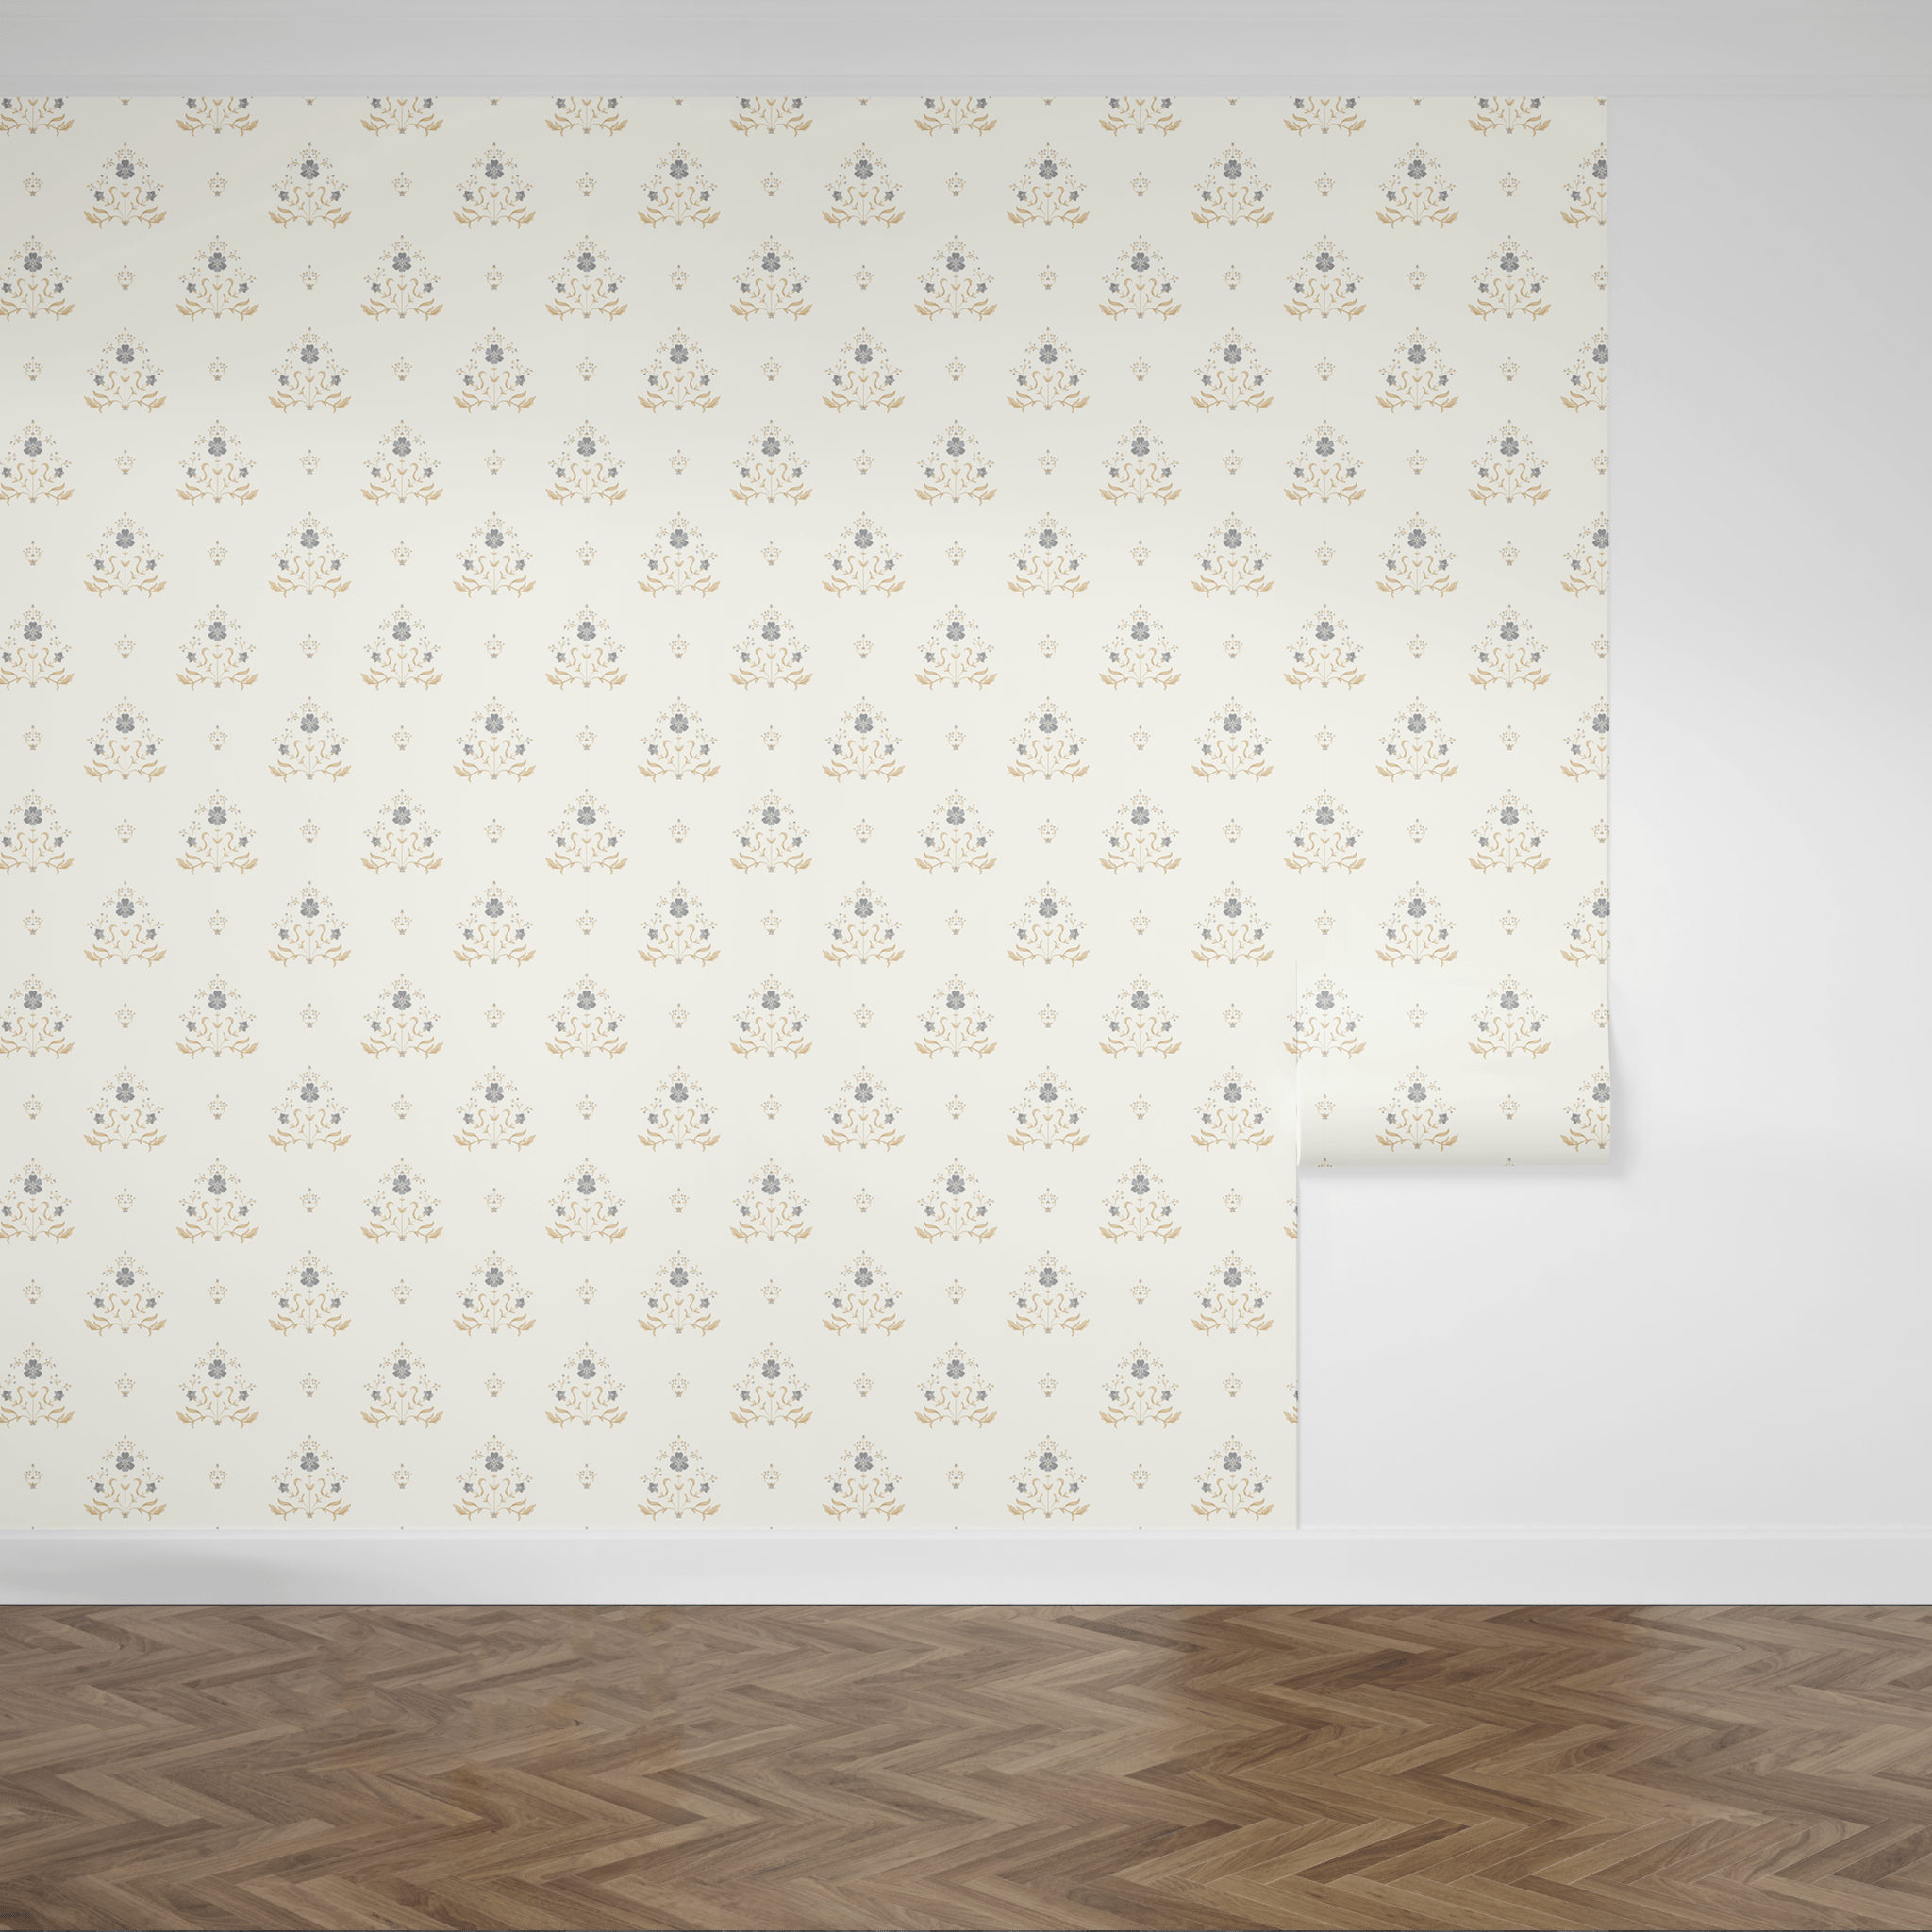 Partial view of a room with royal-style regal floral wallpaper in blue and gold patterns, showcasing the wallpaper application process on a white wall with wooden flooring